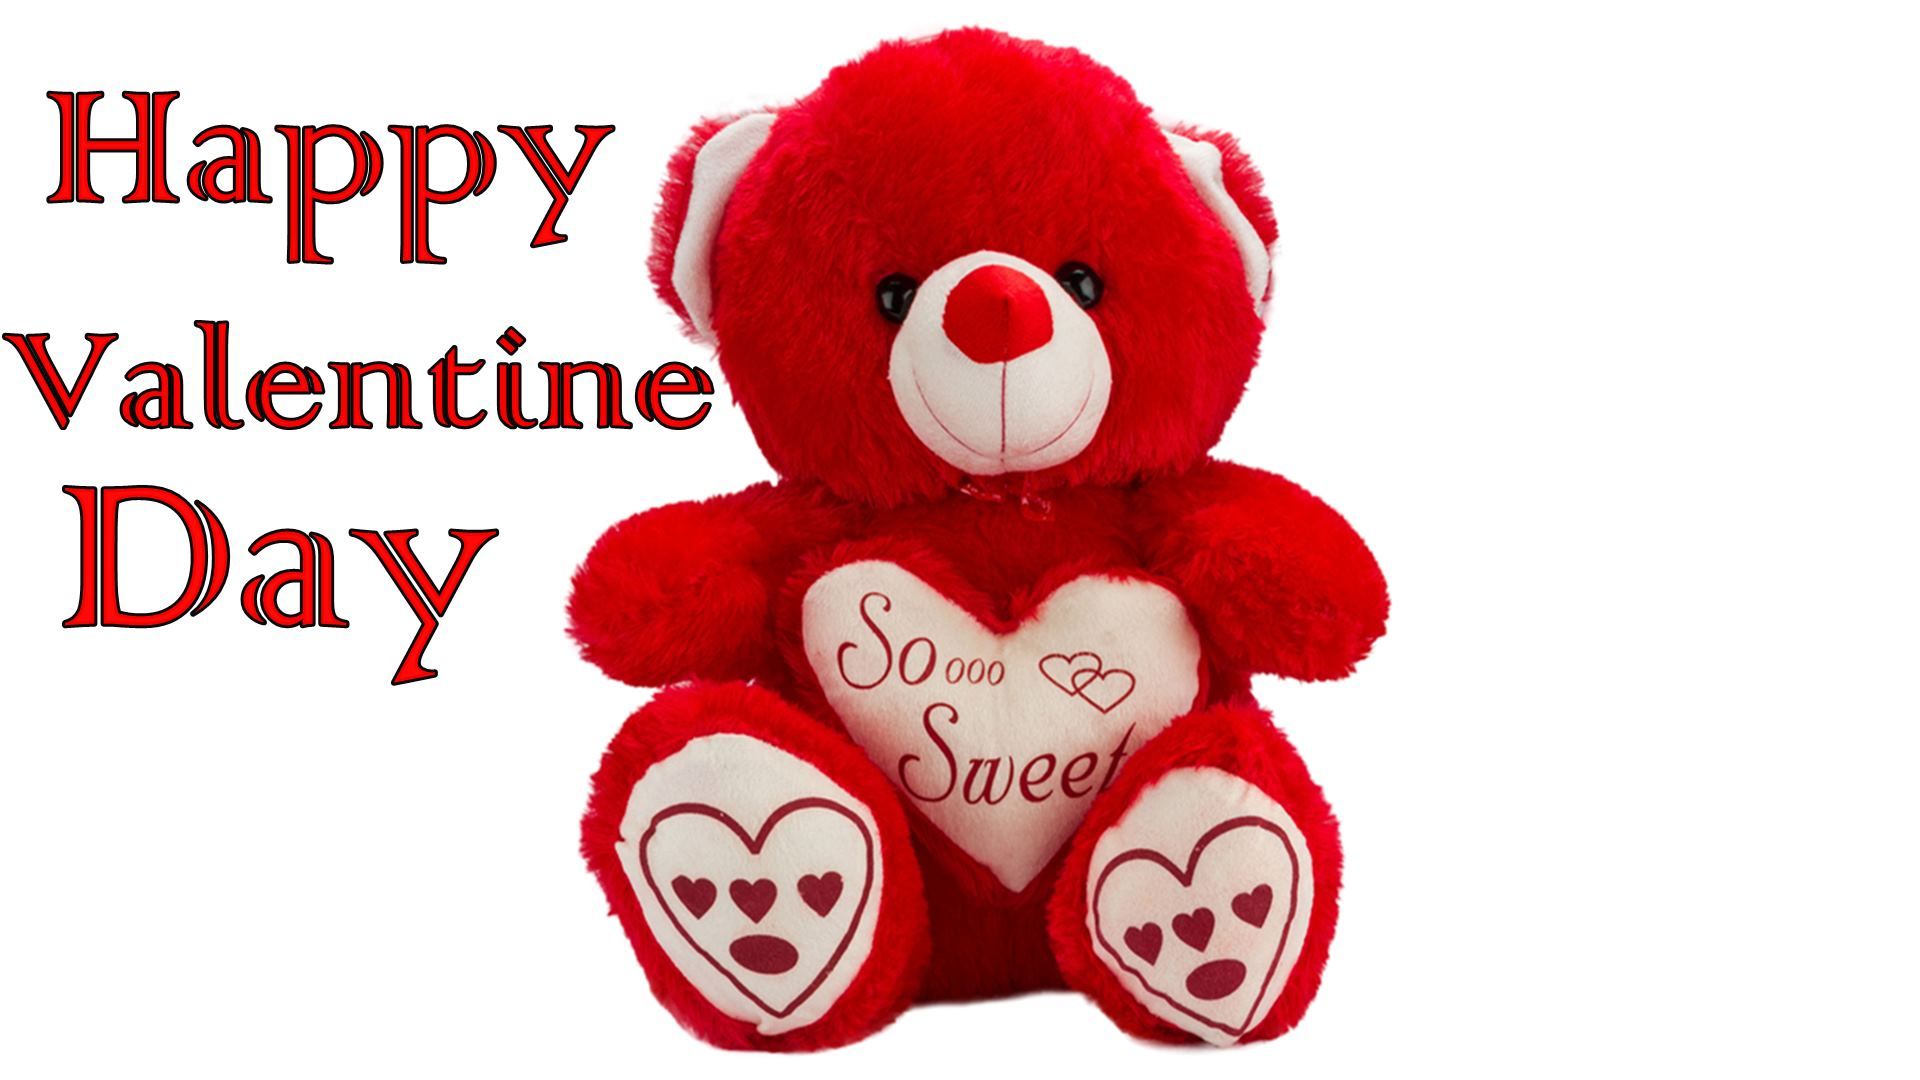 Happy Valentine Day 2016 With Cute .wallpaperpick.com